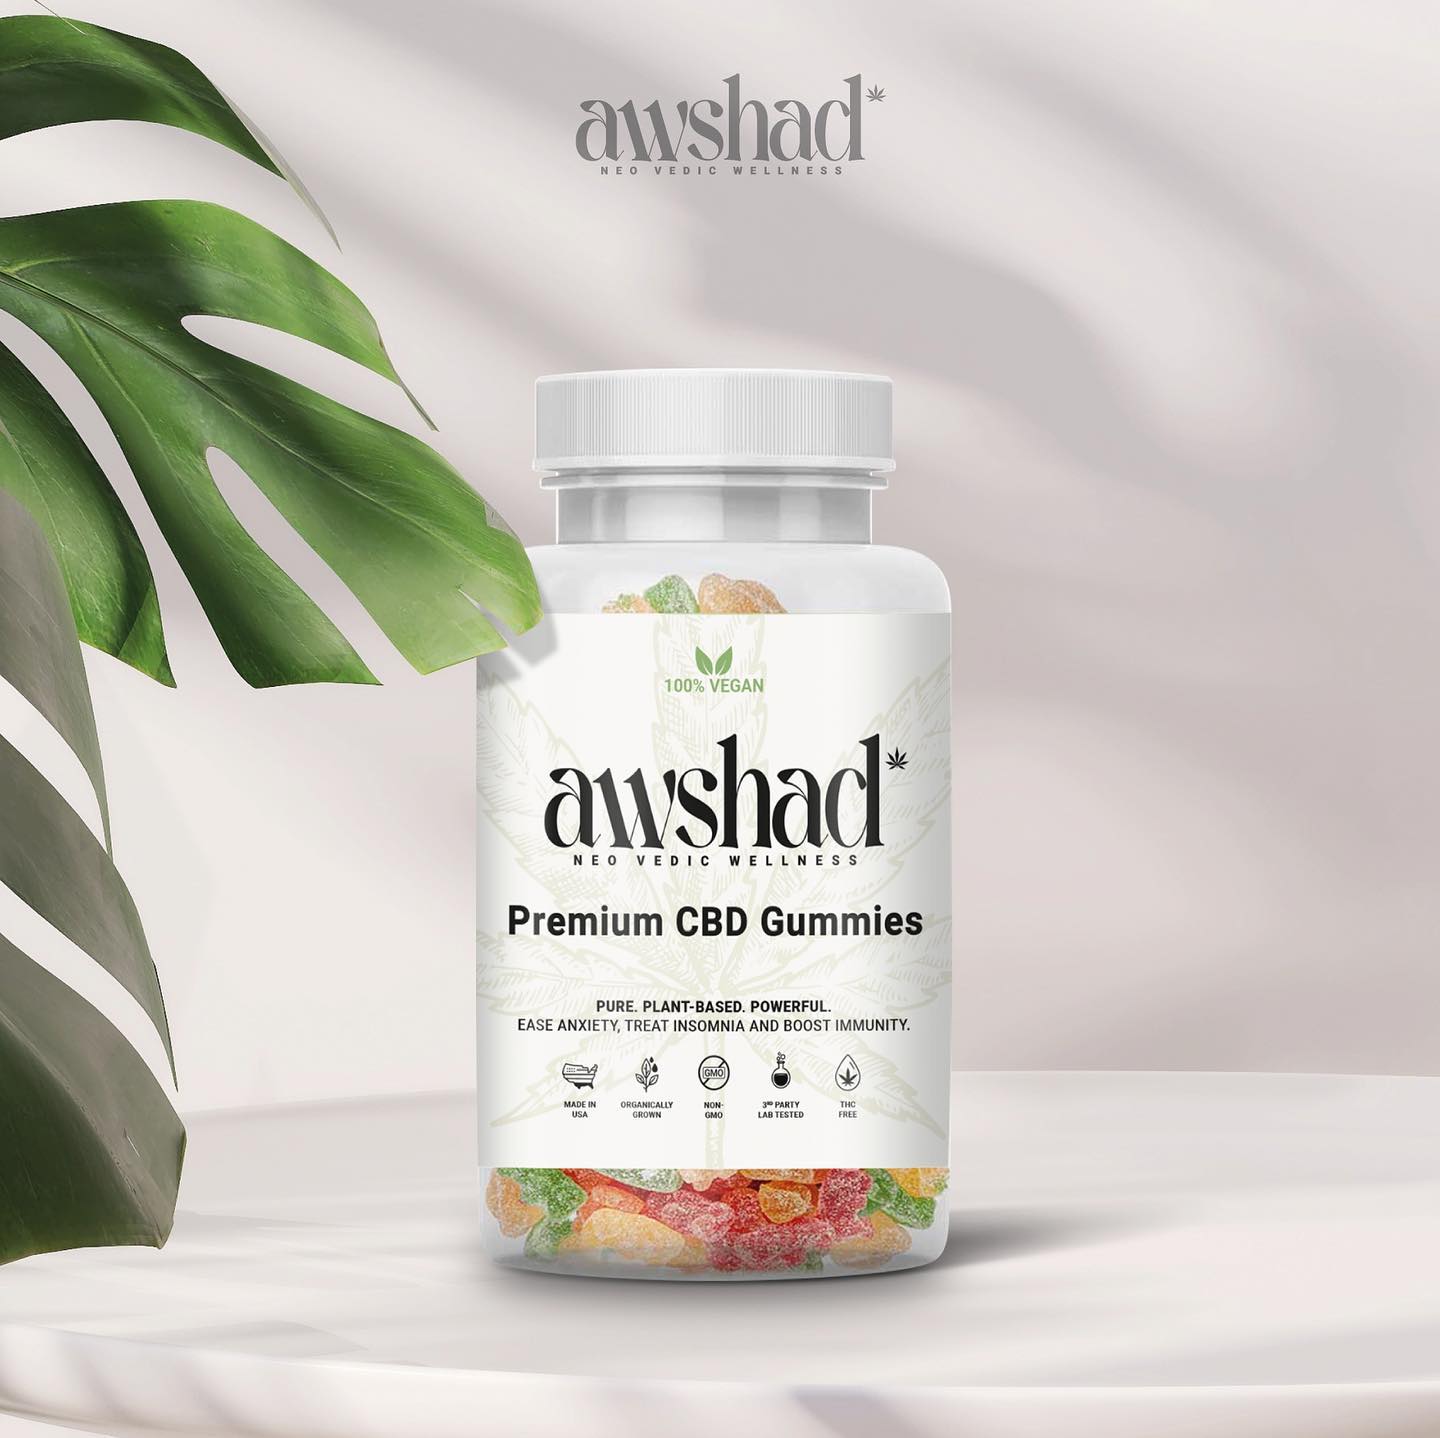 Guess what? 😮

You don’t need a prescription to purchase Awshad’s CBD gummies. 😁

Our prescription-free product can be had twice a day to help attain an overall sense of wellbeing. 😌

Visit www.awshad.com and use code - cbdgum20 at checkout to get a 20% off on your first purchase. 🥳

#awshad #allnatural #hempbenefits #gummies  #wellness #sleepaid #cbdgummies #vijayaoil  #hempextract #hempproducts #insomnia #health #healthandwellness #healthy #immunity #heal #natural #naturalremedy #ordernow #care #love  #safe #doctor #ayurveda #healing #newproduct